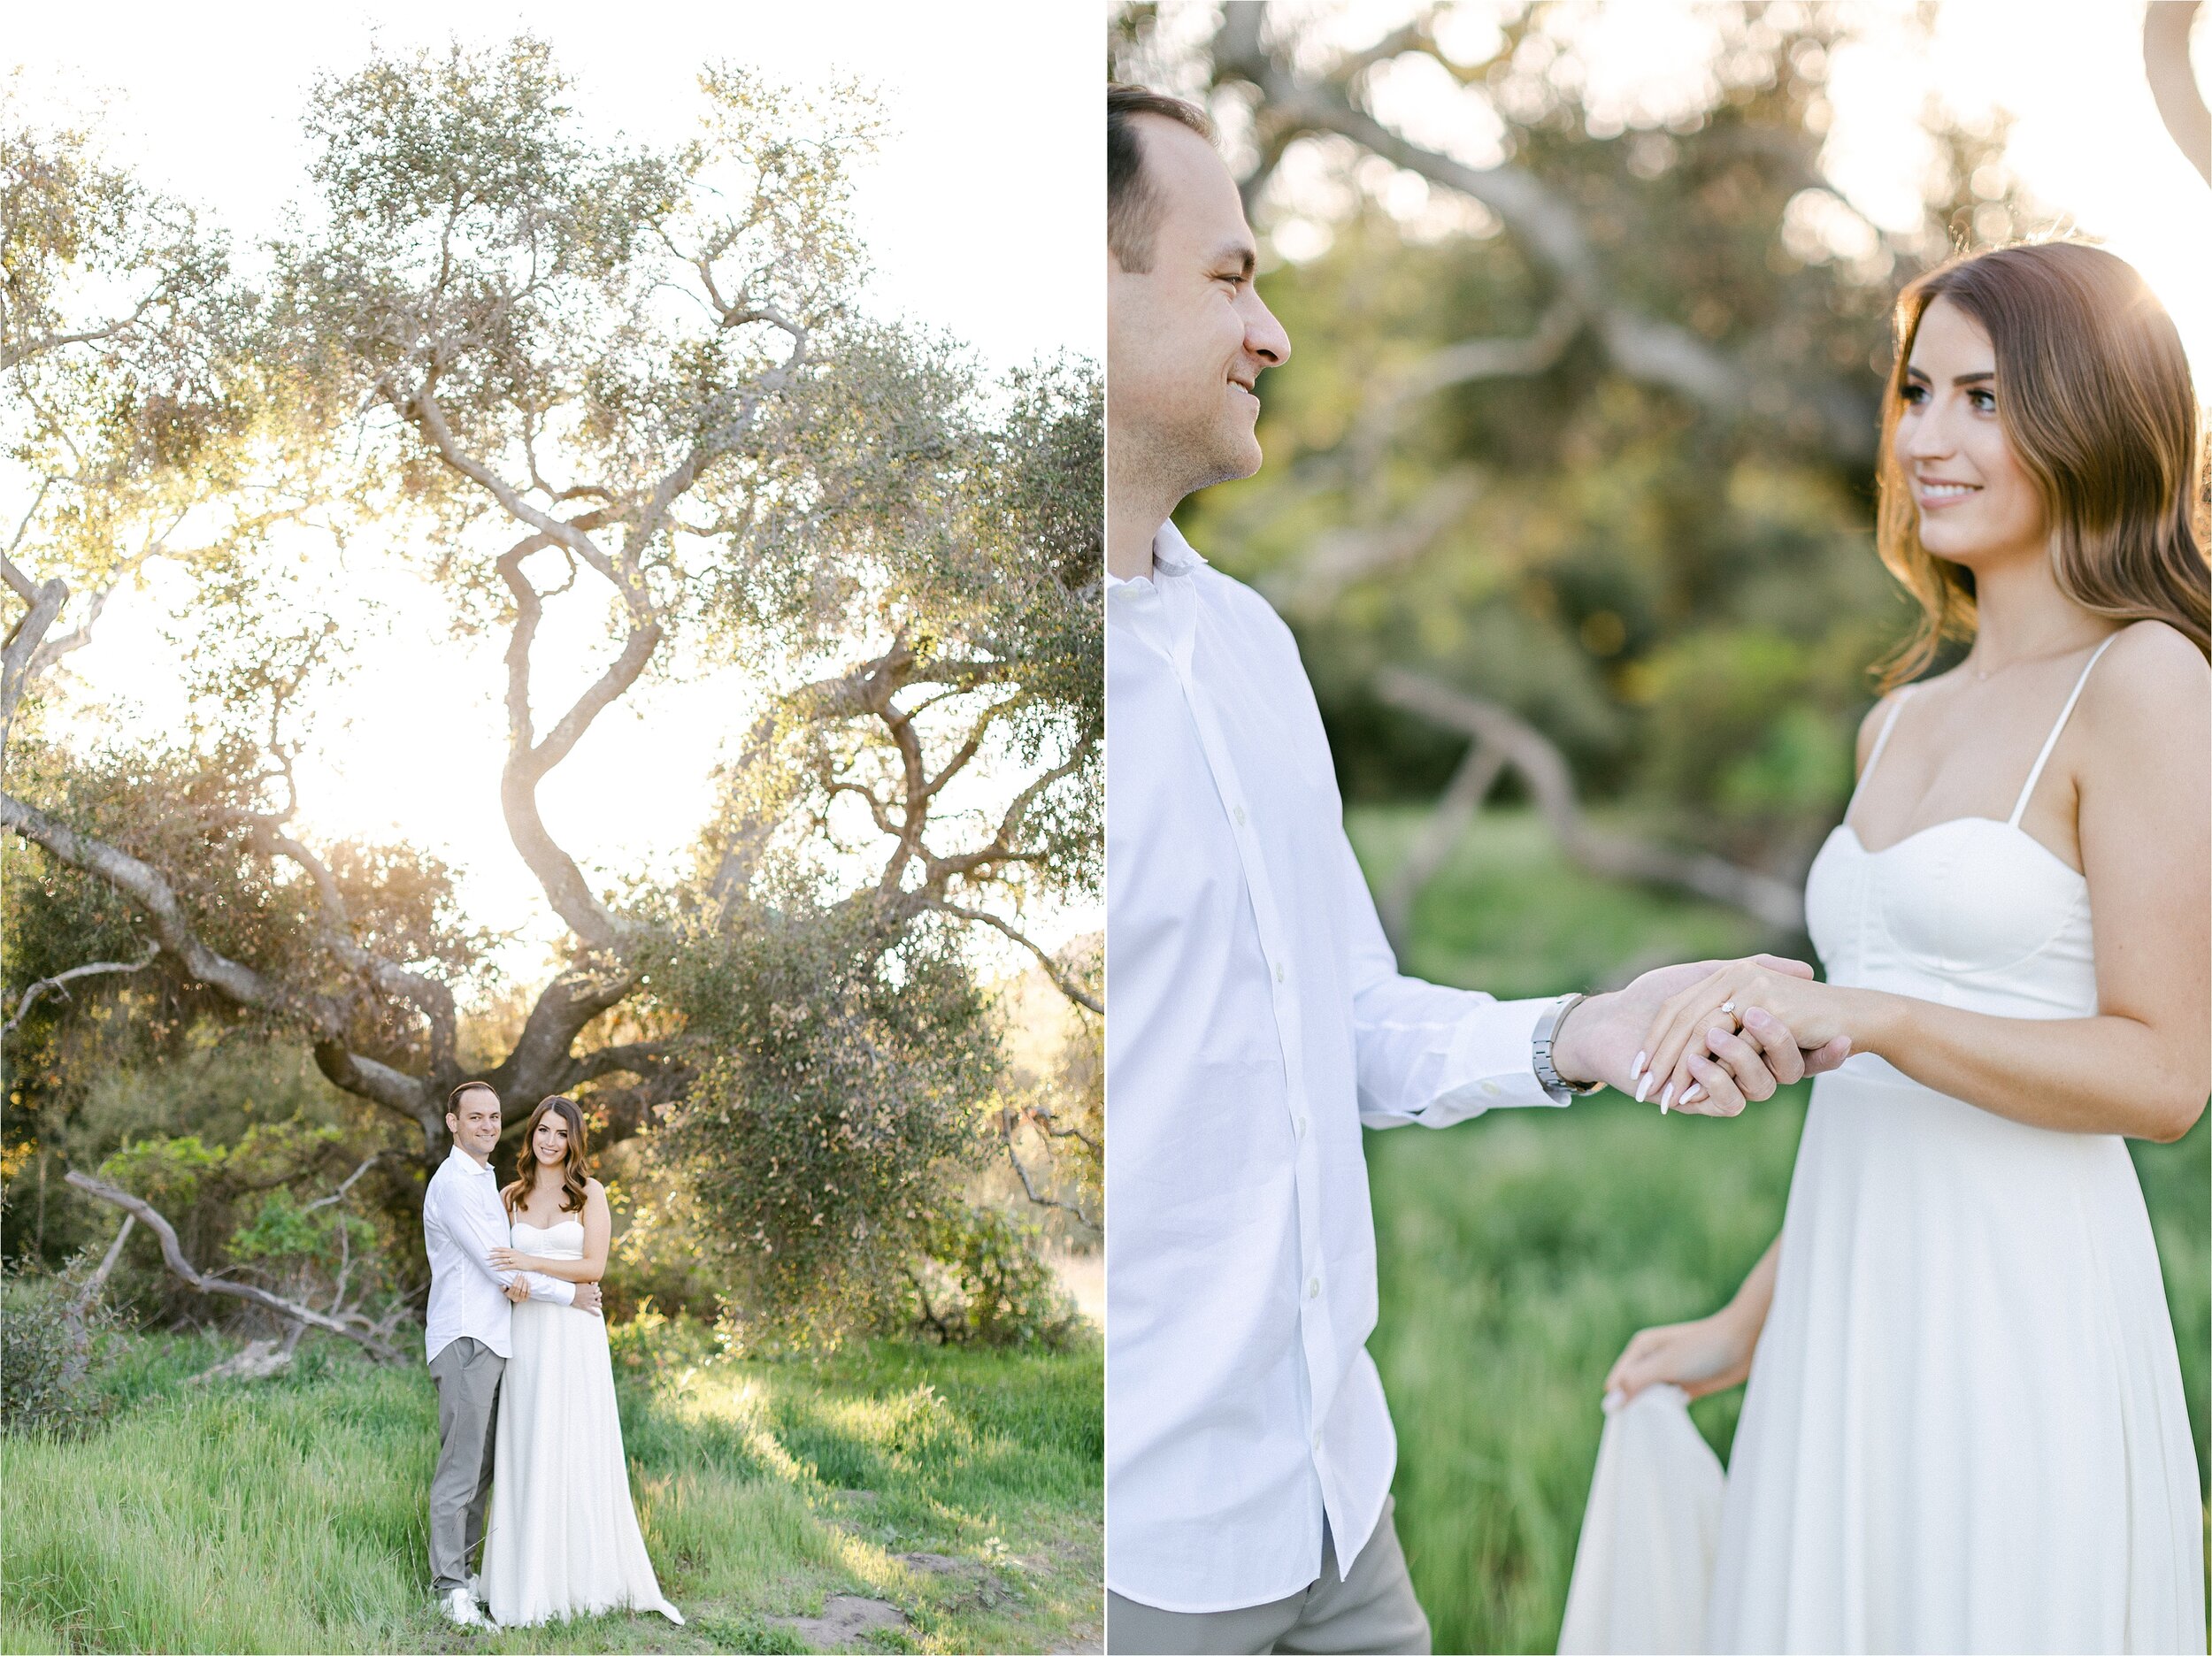 Natural Light Engagement Photos in Orange County, CA.  Male is wearing a white button down and grey pants, while the female is wearing a white, full length, spaghetti strap chiffon gown.